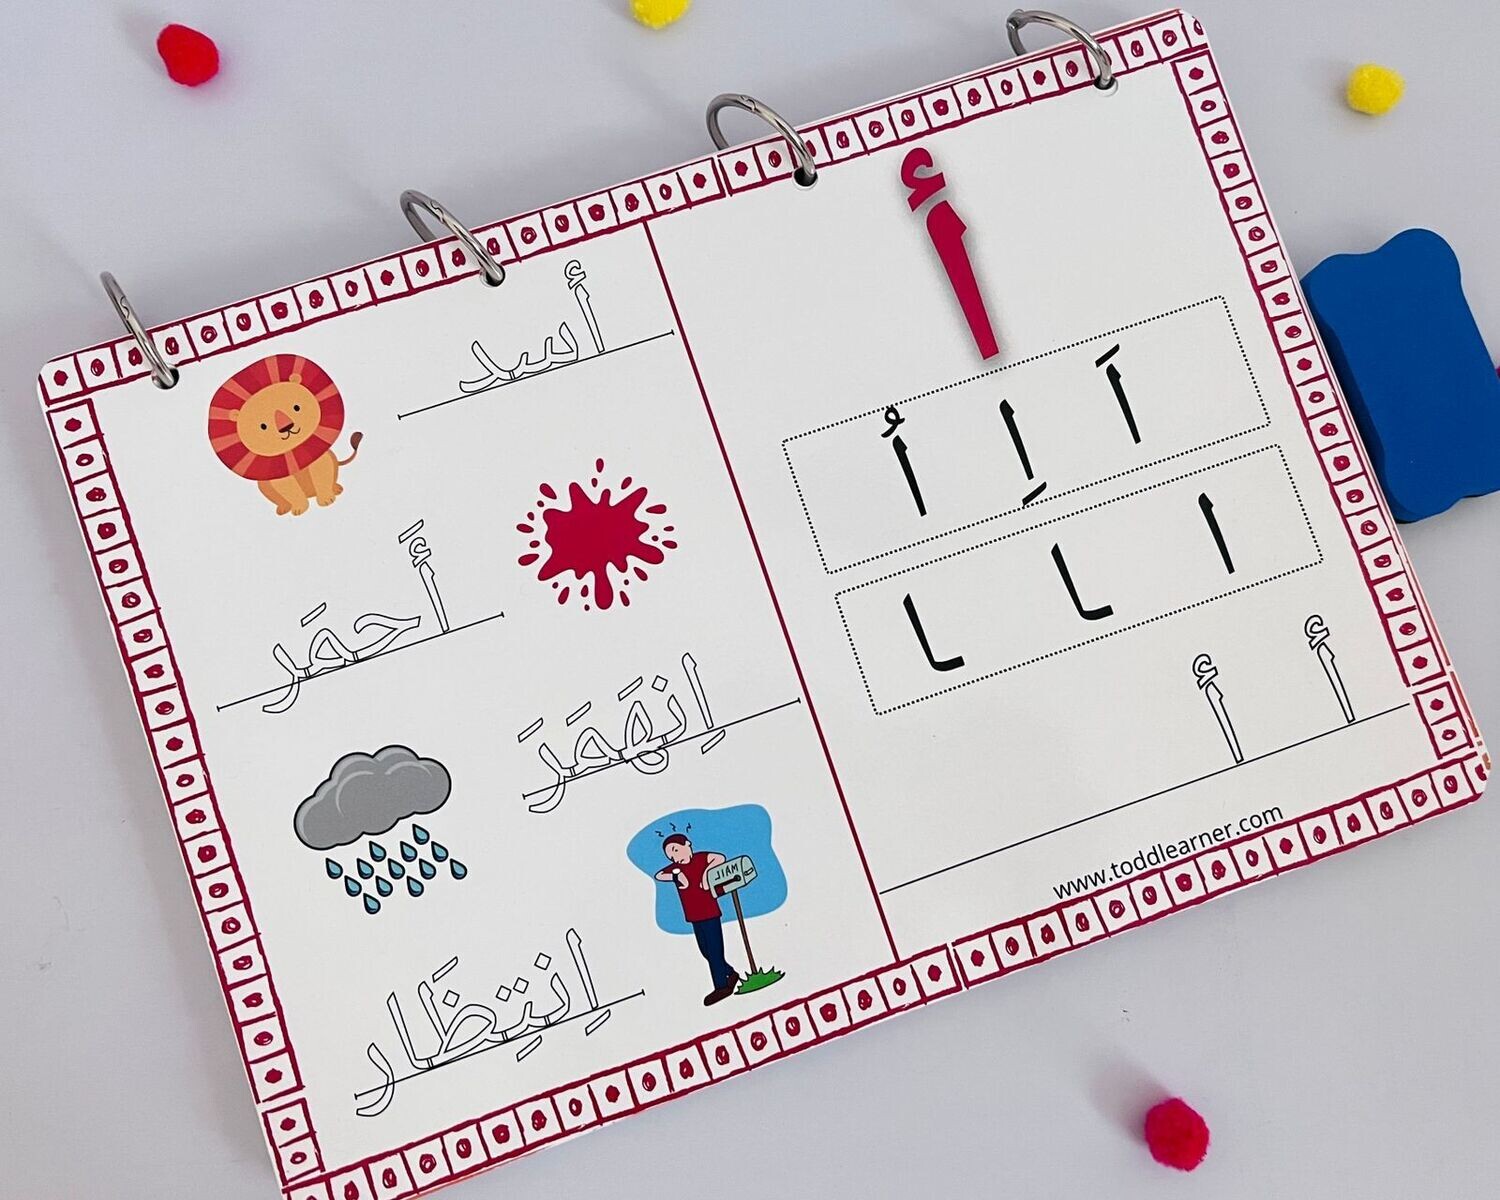 Arabic Writing Practice Book for 3-5 years with Word Practice exercises.